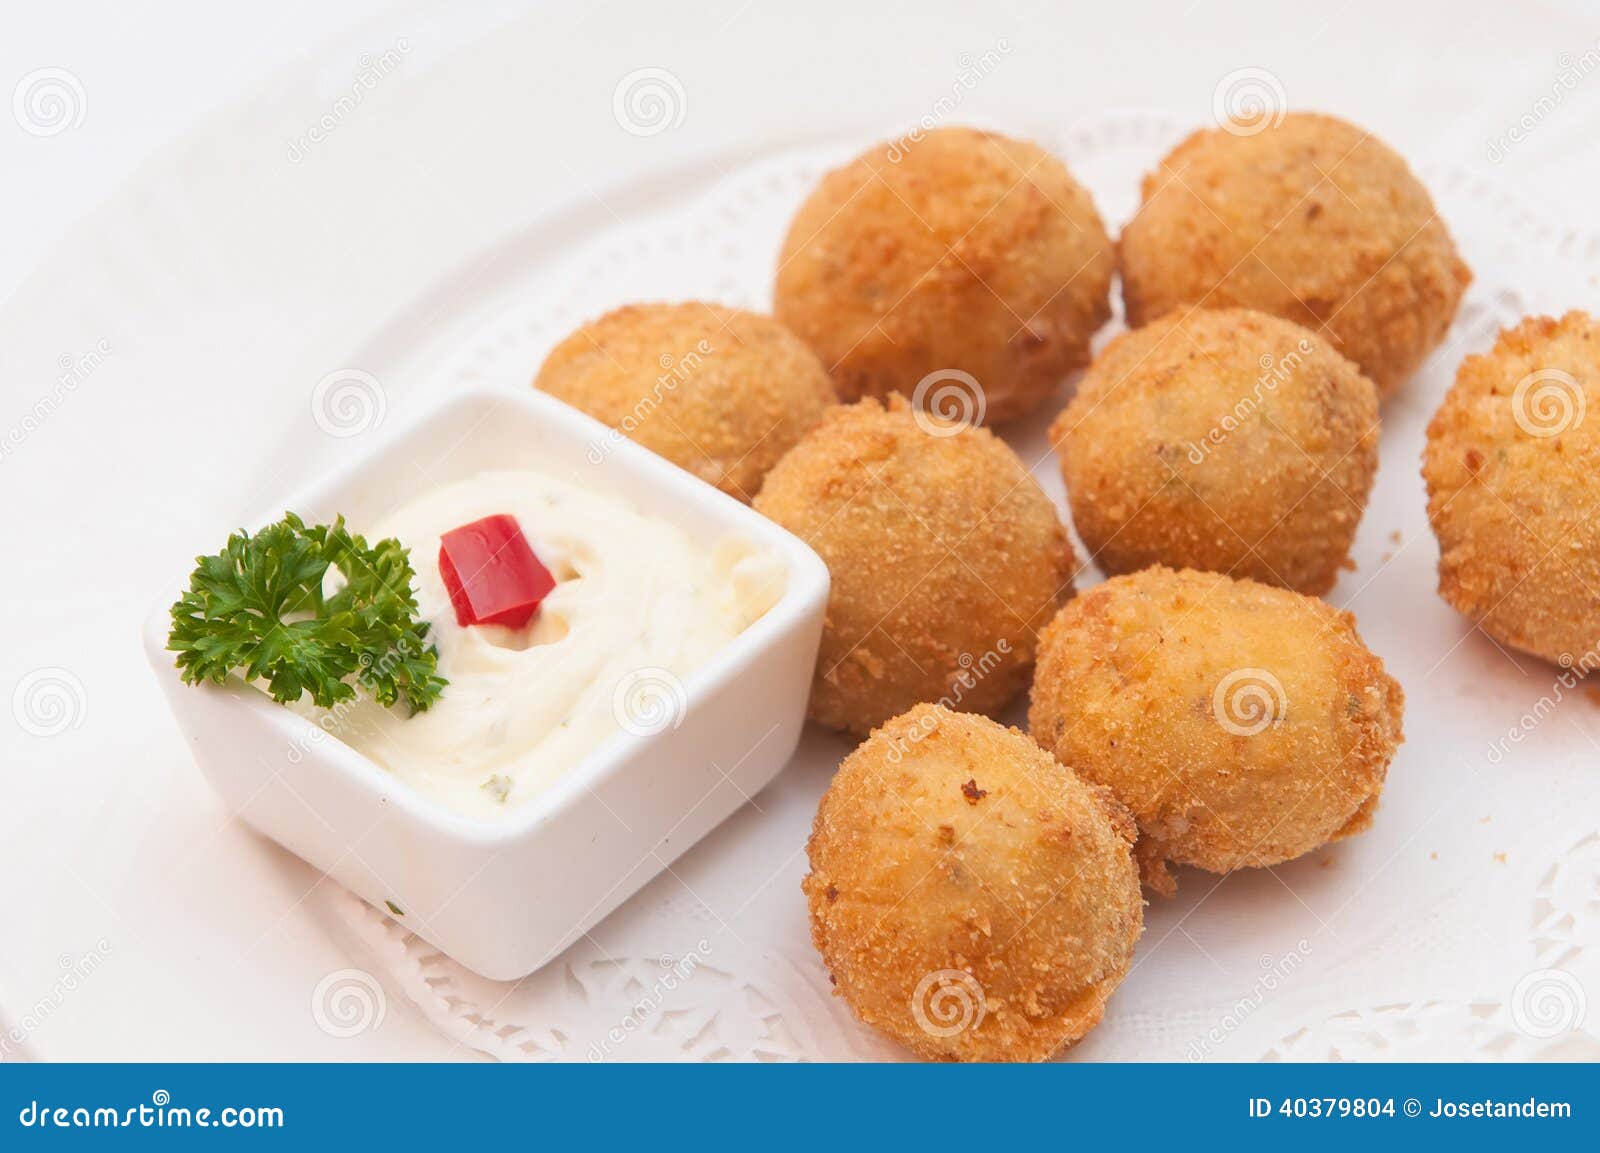 closeup of a plate with croquetas, spanish croquettes, on a set table